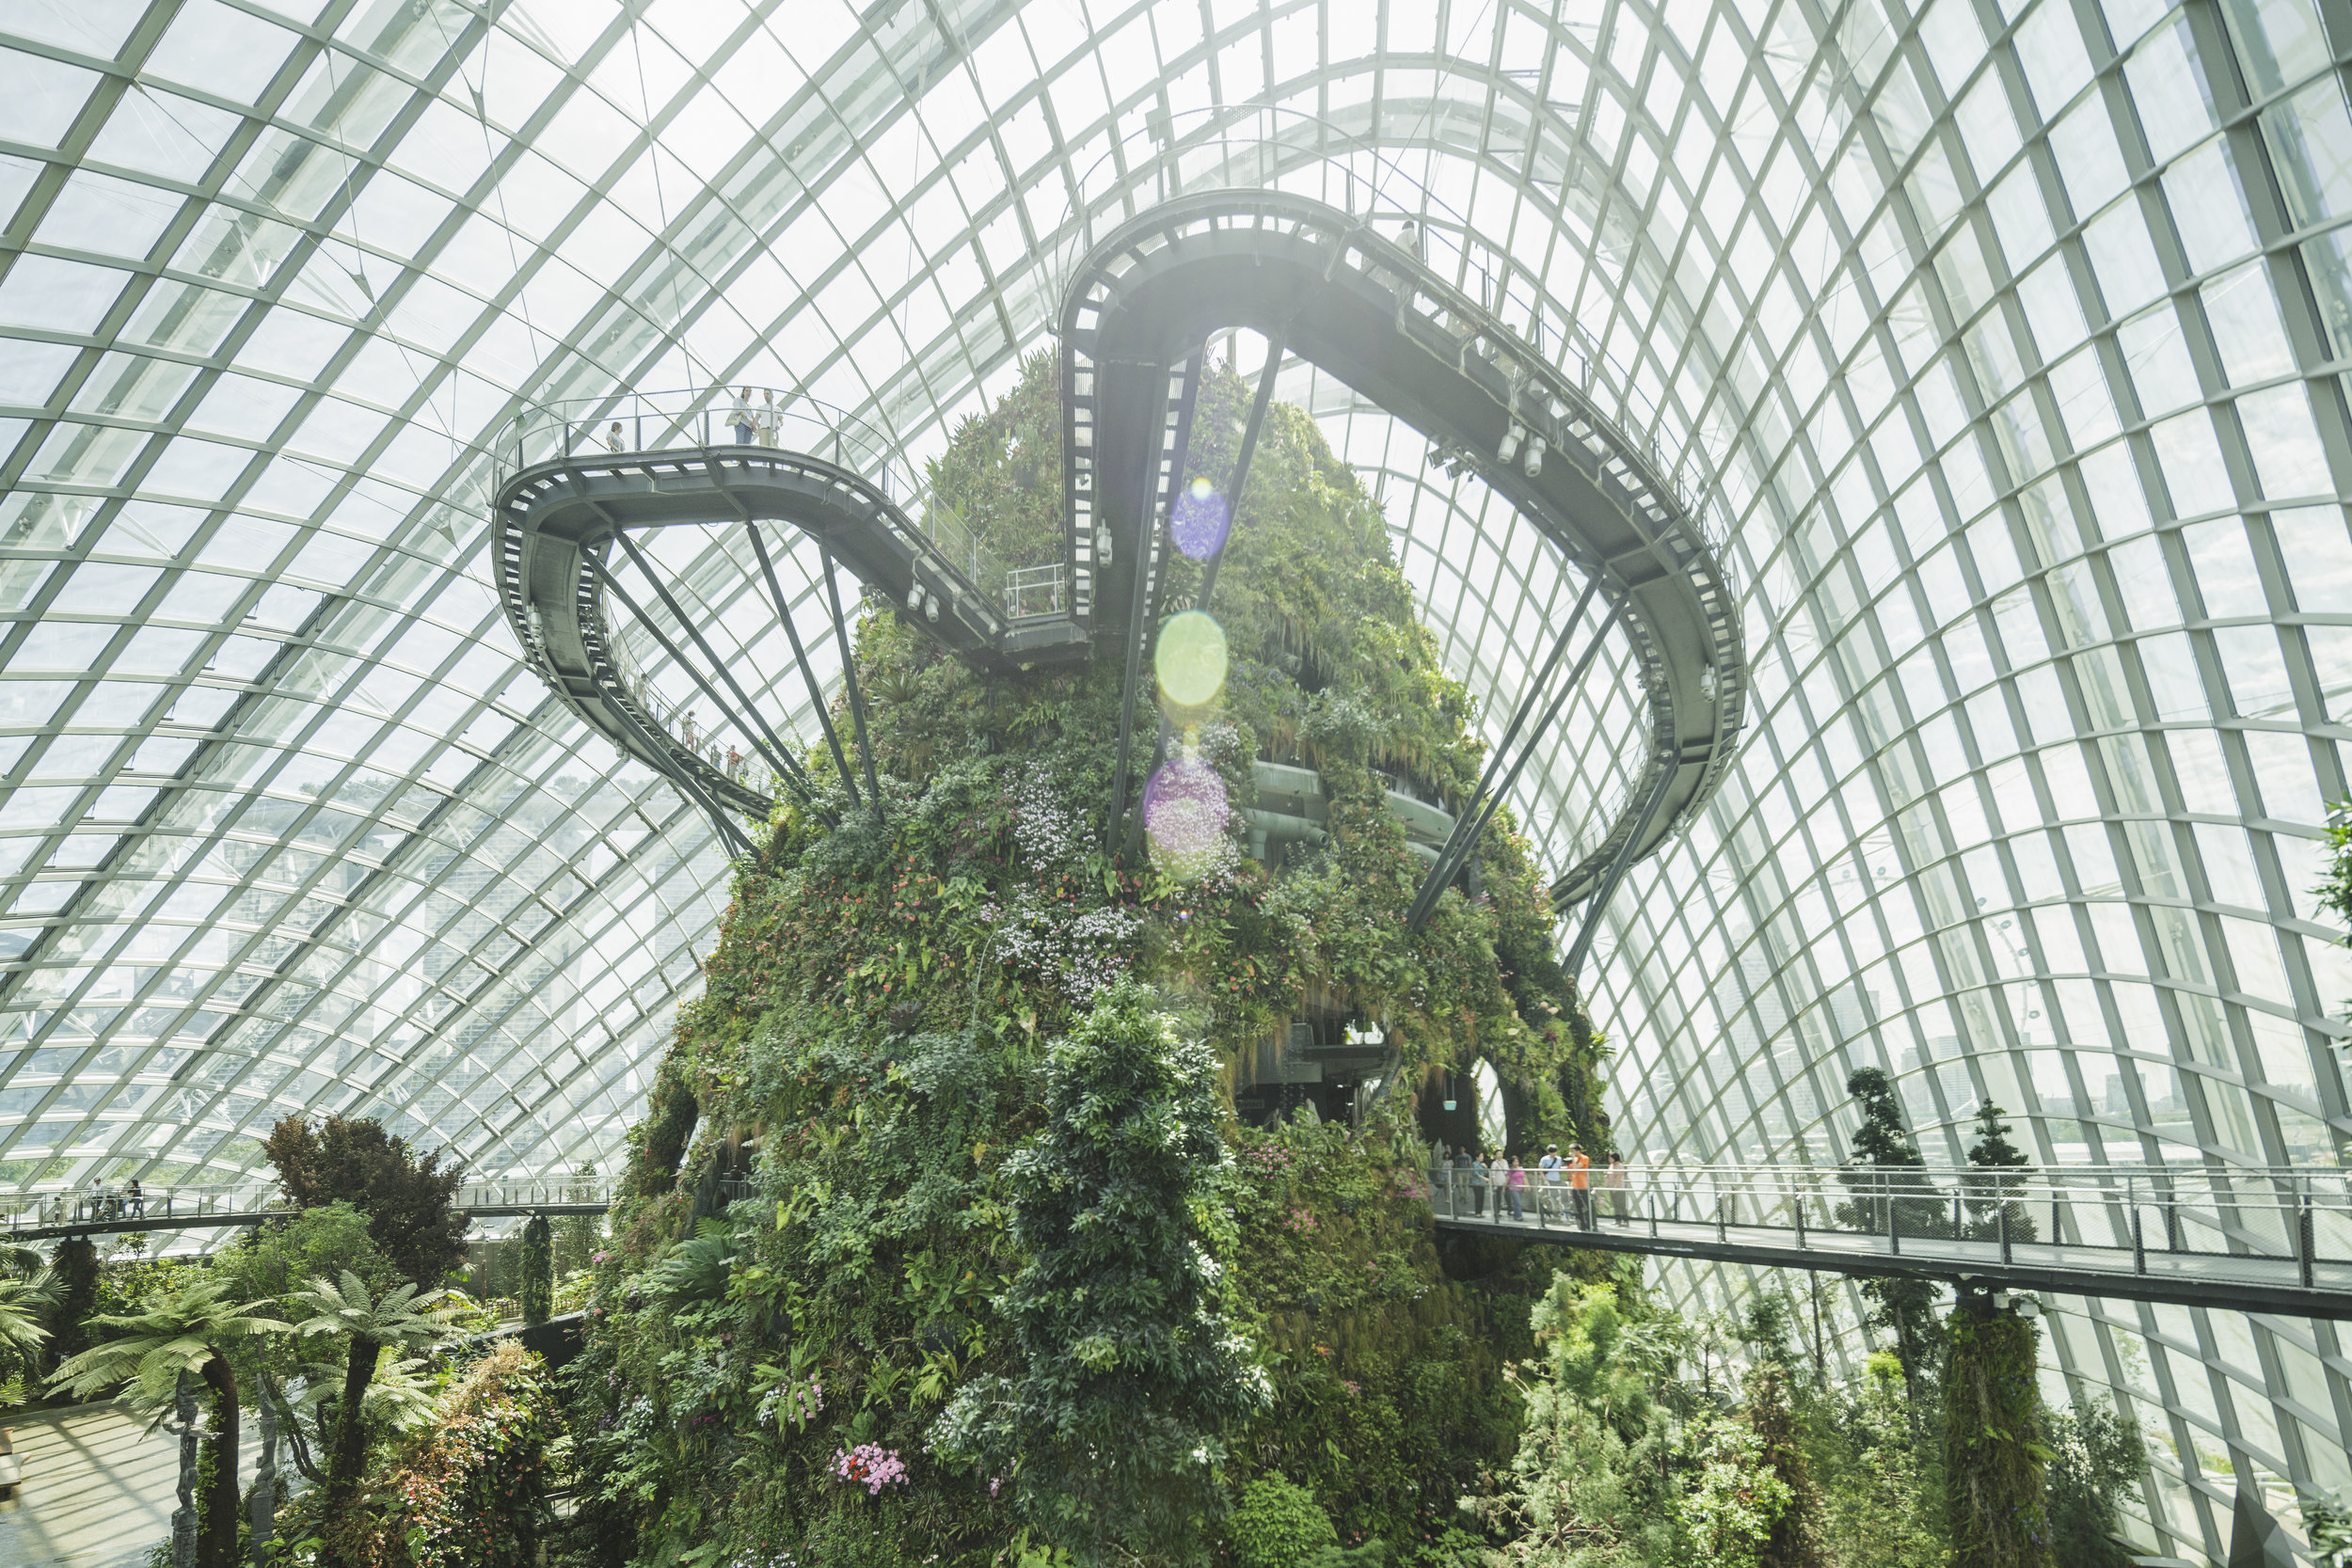   Gardens by the bay, Singapore   client:   MONOCLE     